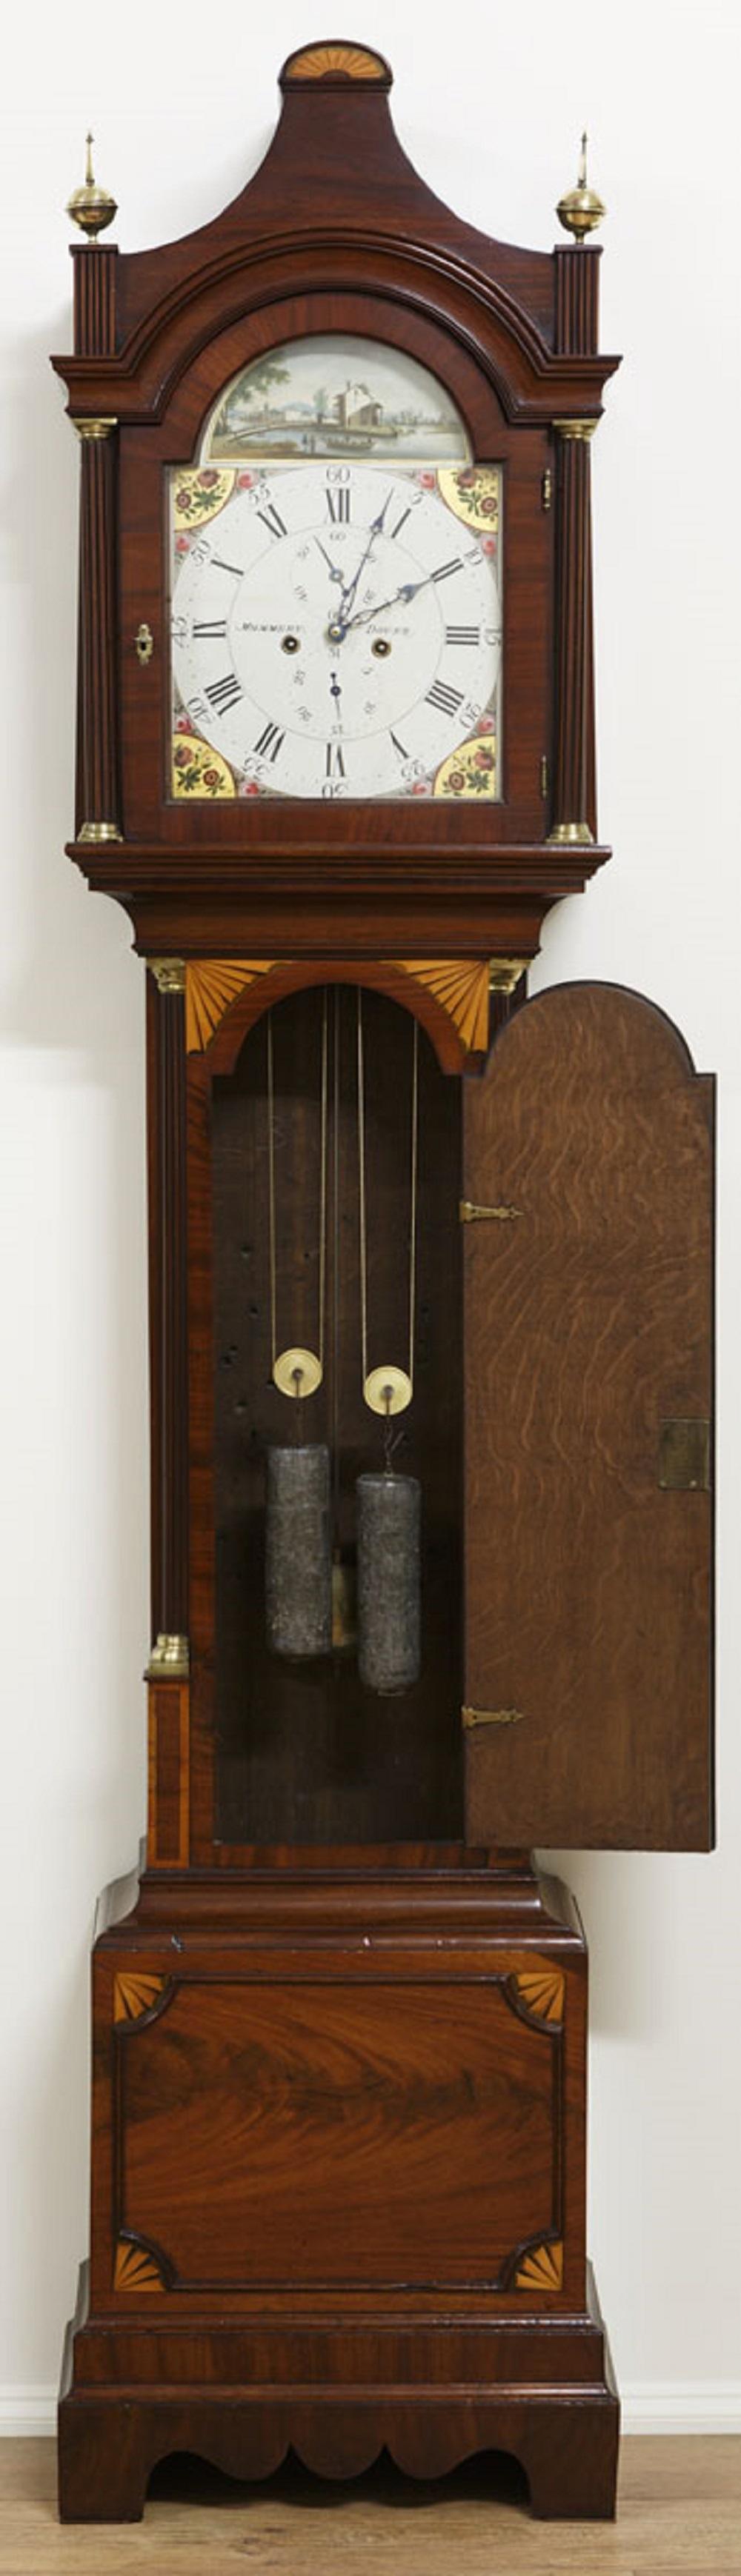 Mahogany Longcase clock by Mummery, Dover.
 
Late Georgian longcase clock in a finely figured mahogany case with satinwood stringing and quadrant shell inlay to the raised, moulded base. Long arched trunk door with reeded canted corners and brass